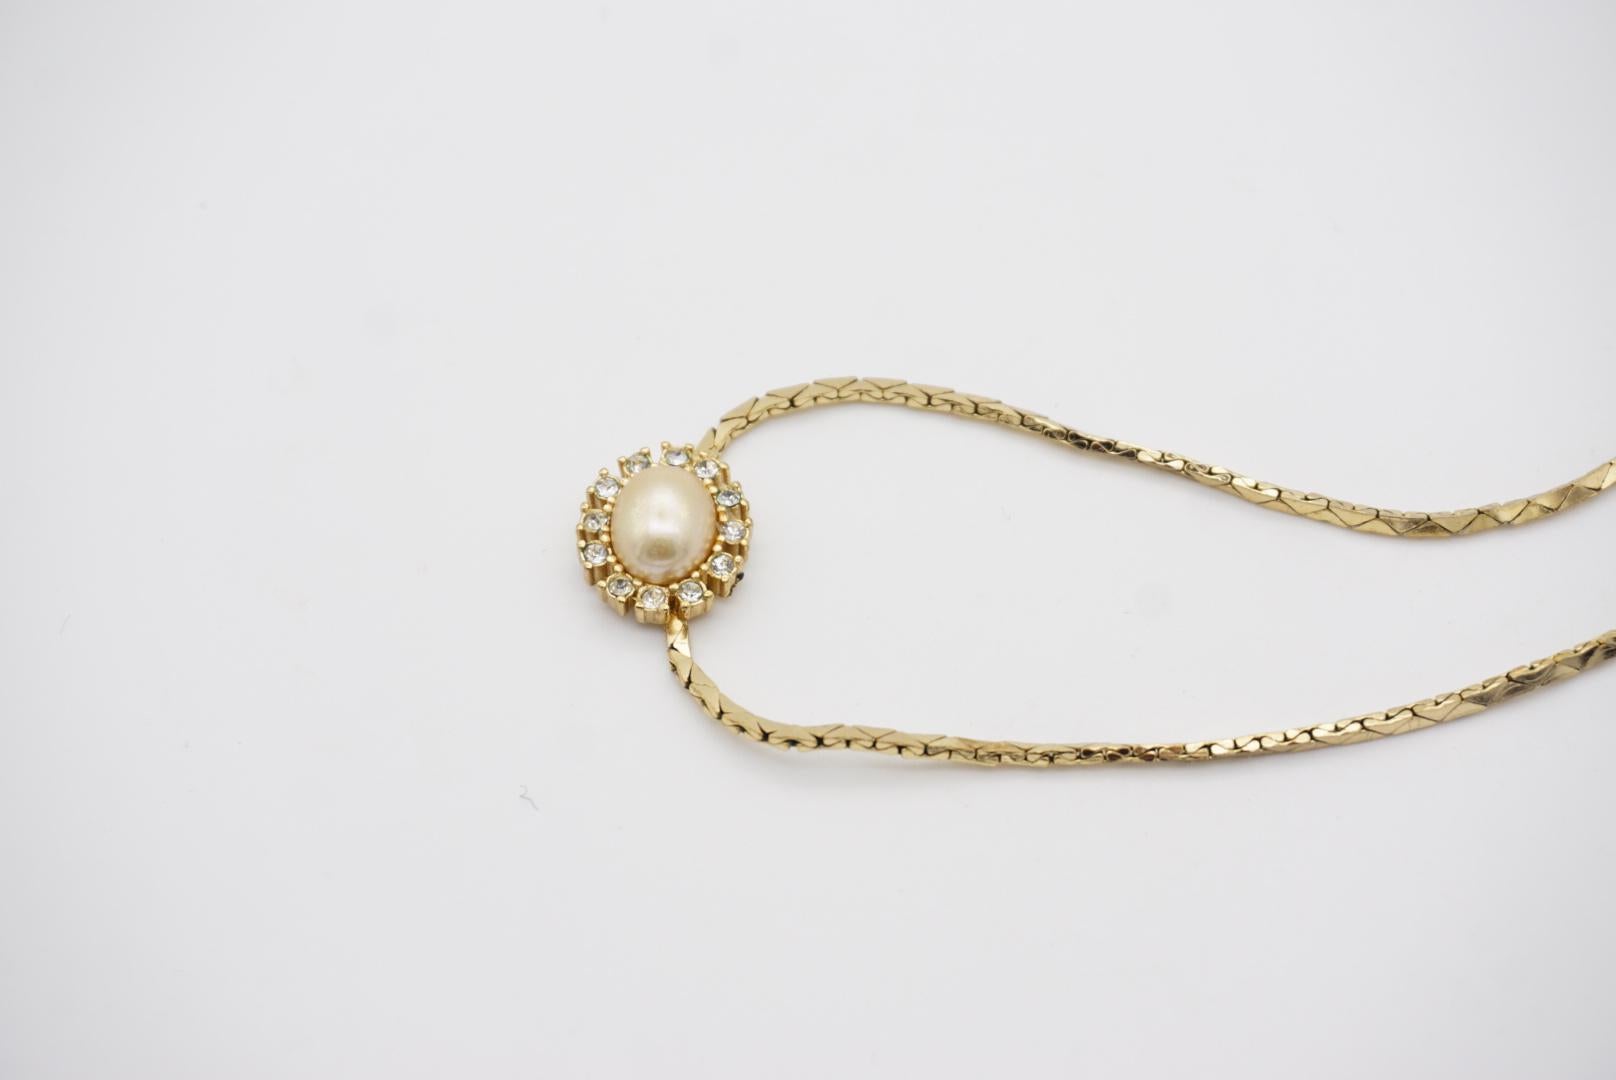 Christian Dior Vintage 1980s White Oval Pearl Shining Crystals Pendant Necklace For Sale 3